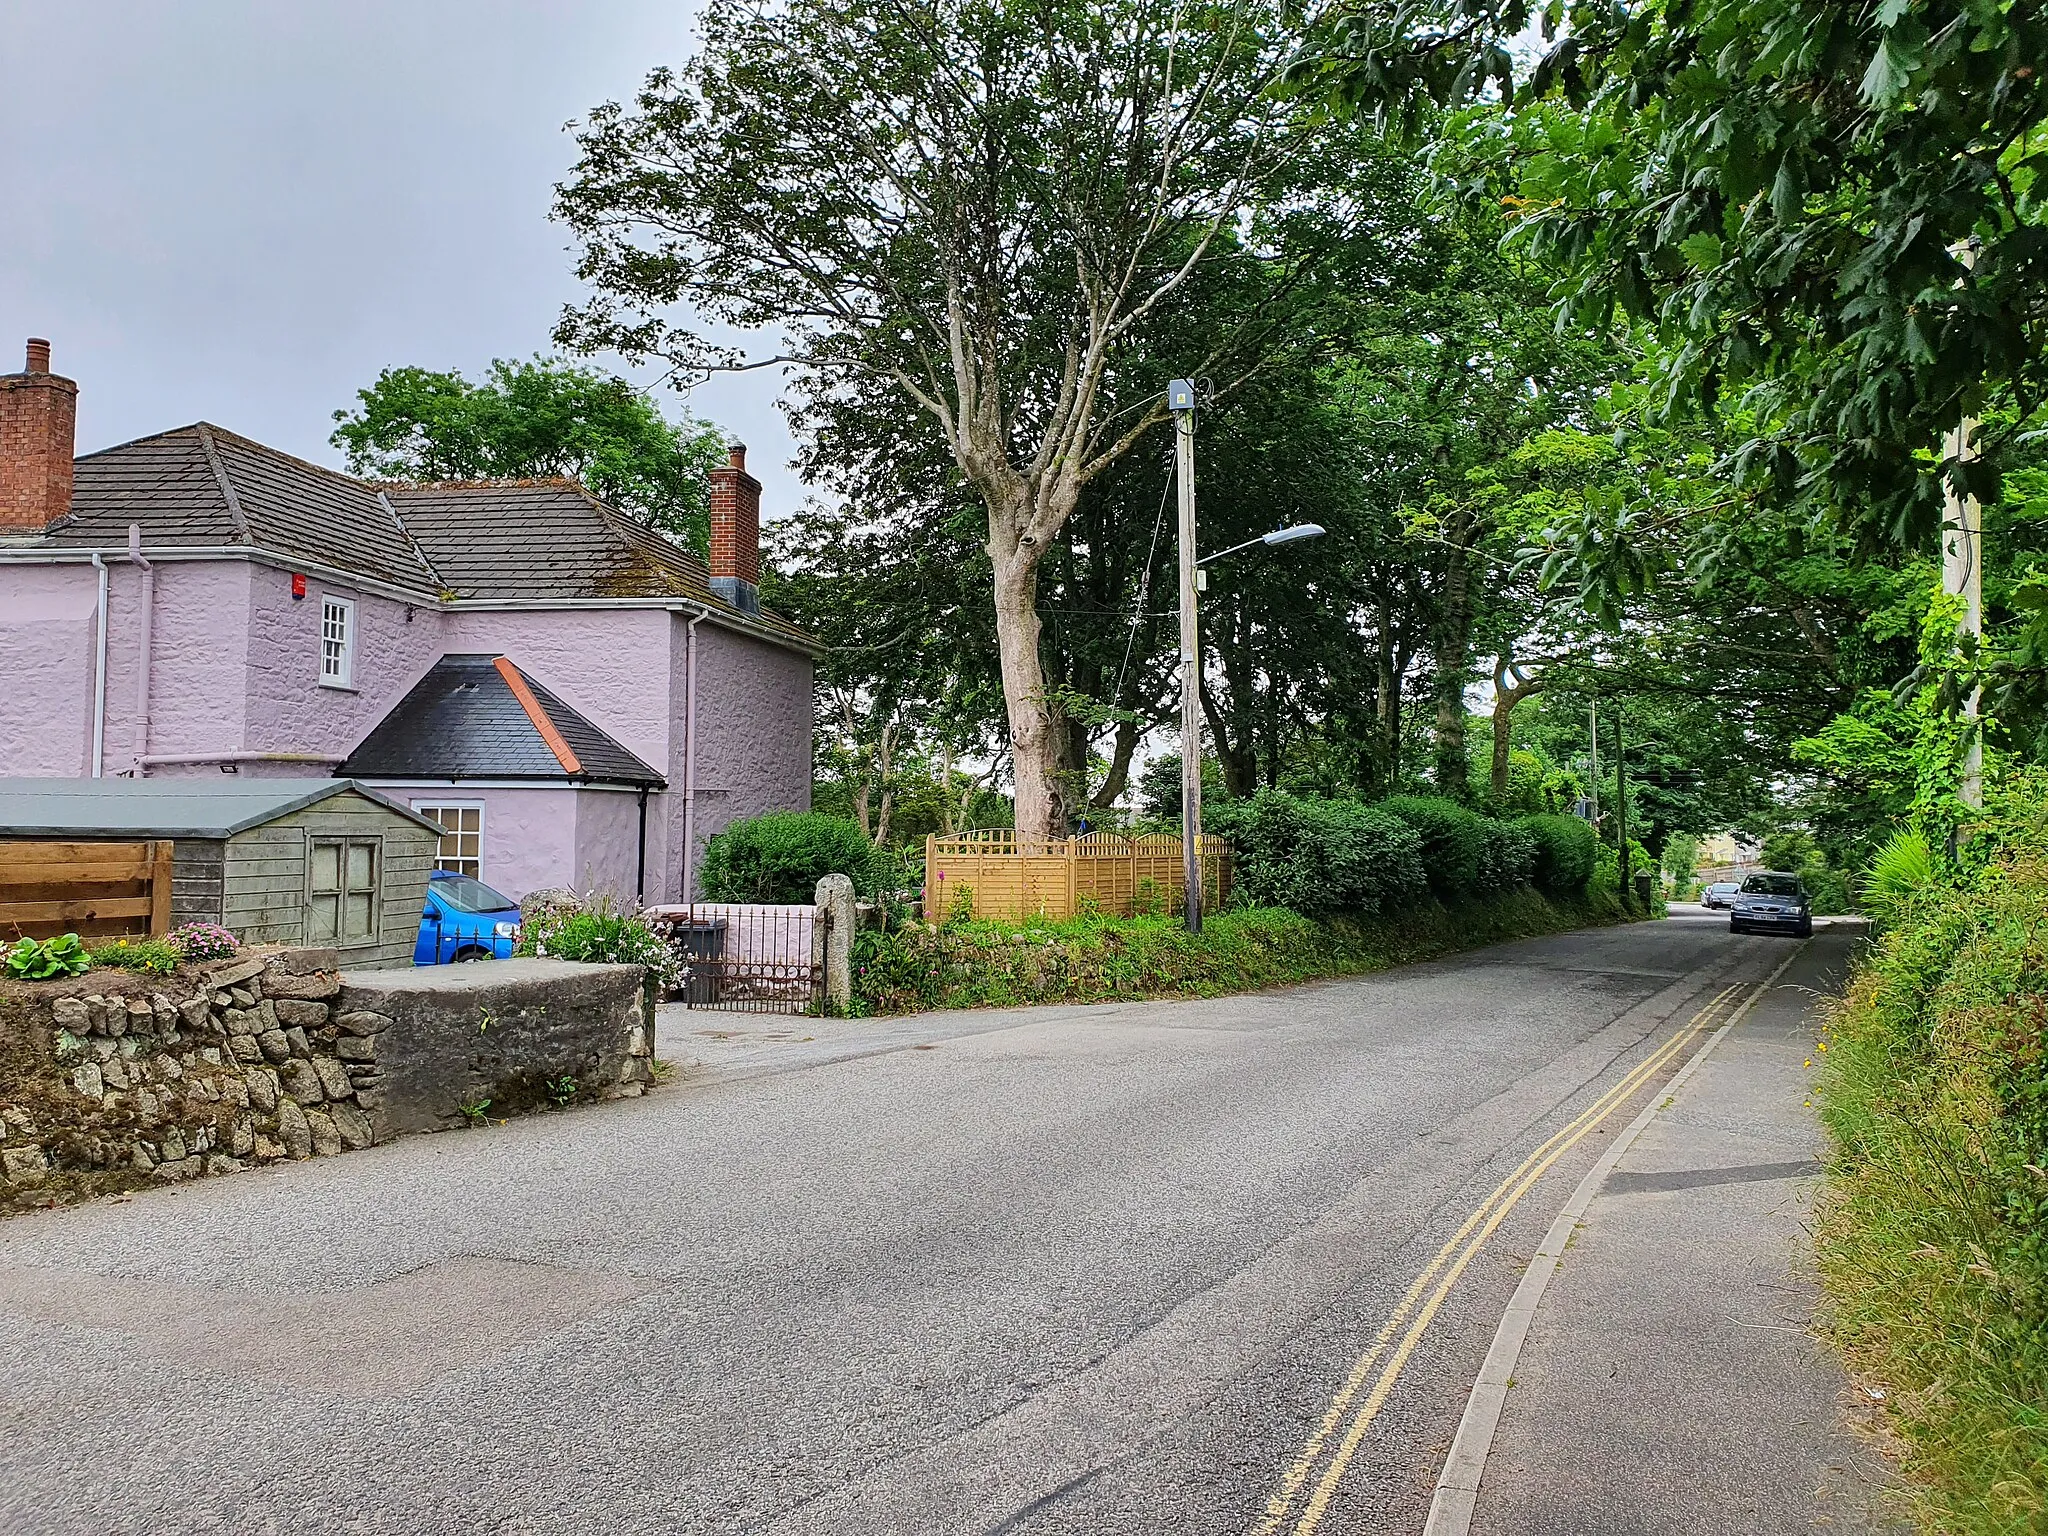 Photo showing: Crewenna Road into Praze-an-Beeble, Cornwall in July 2021